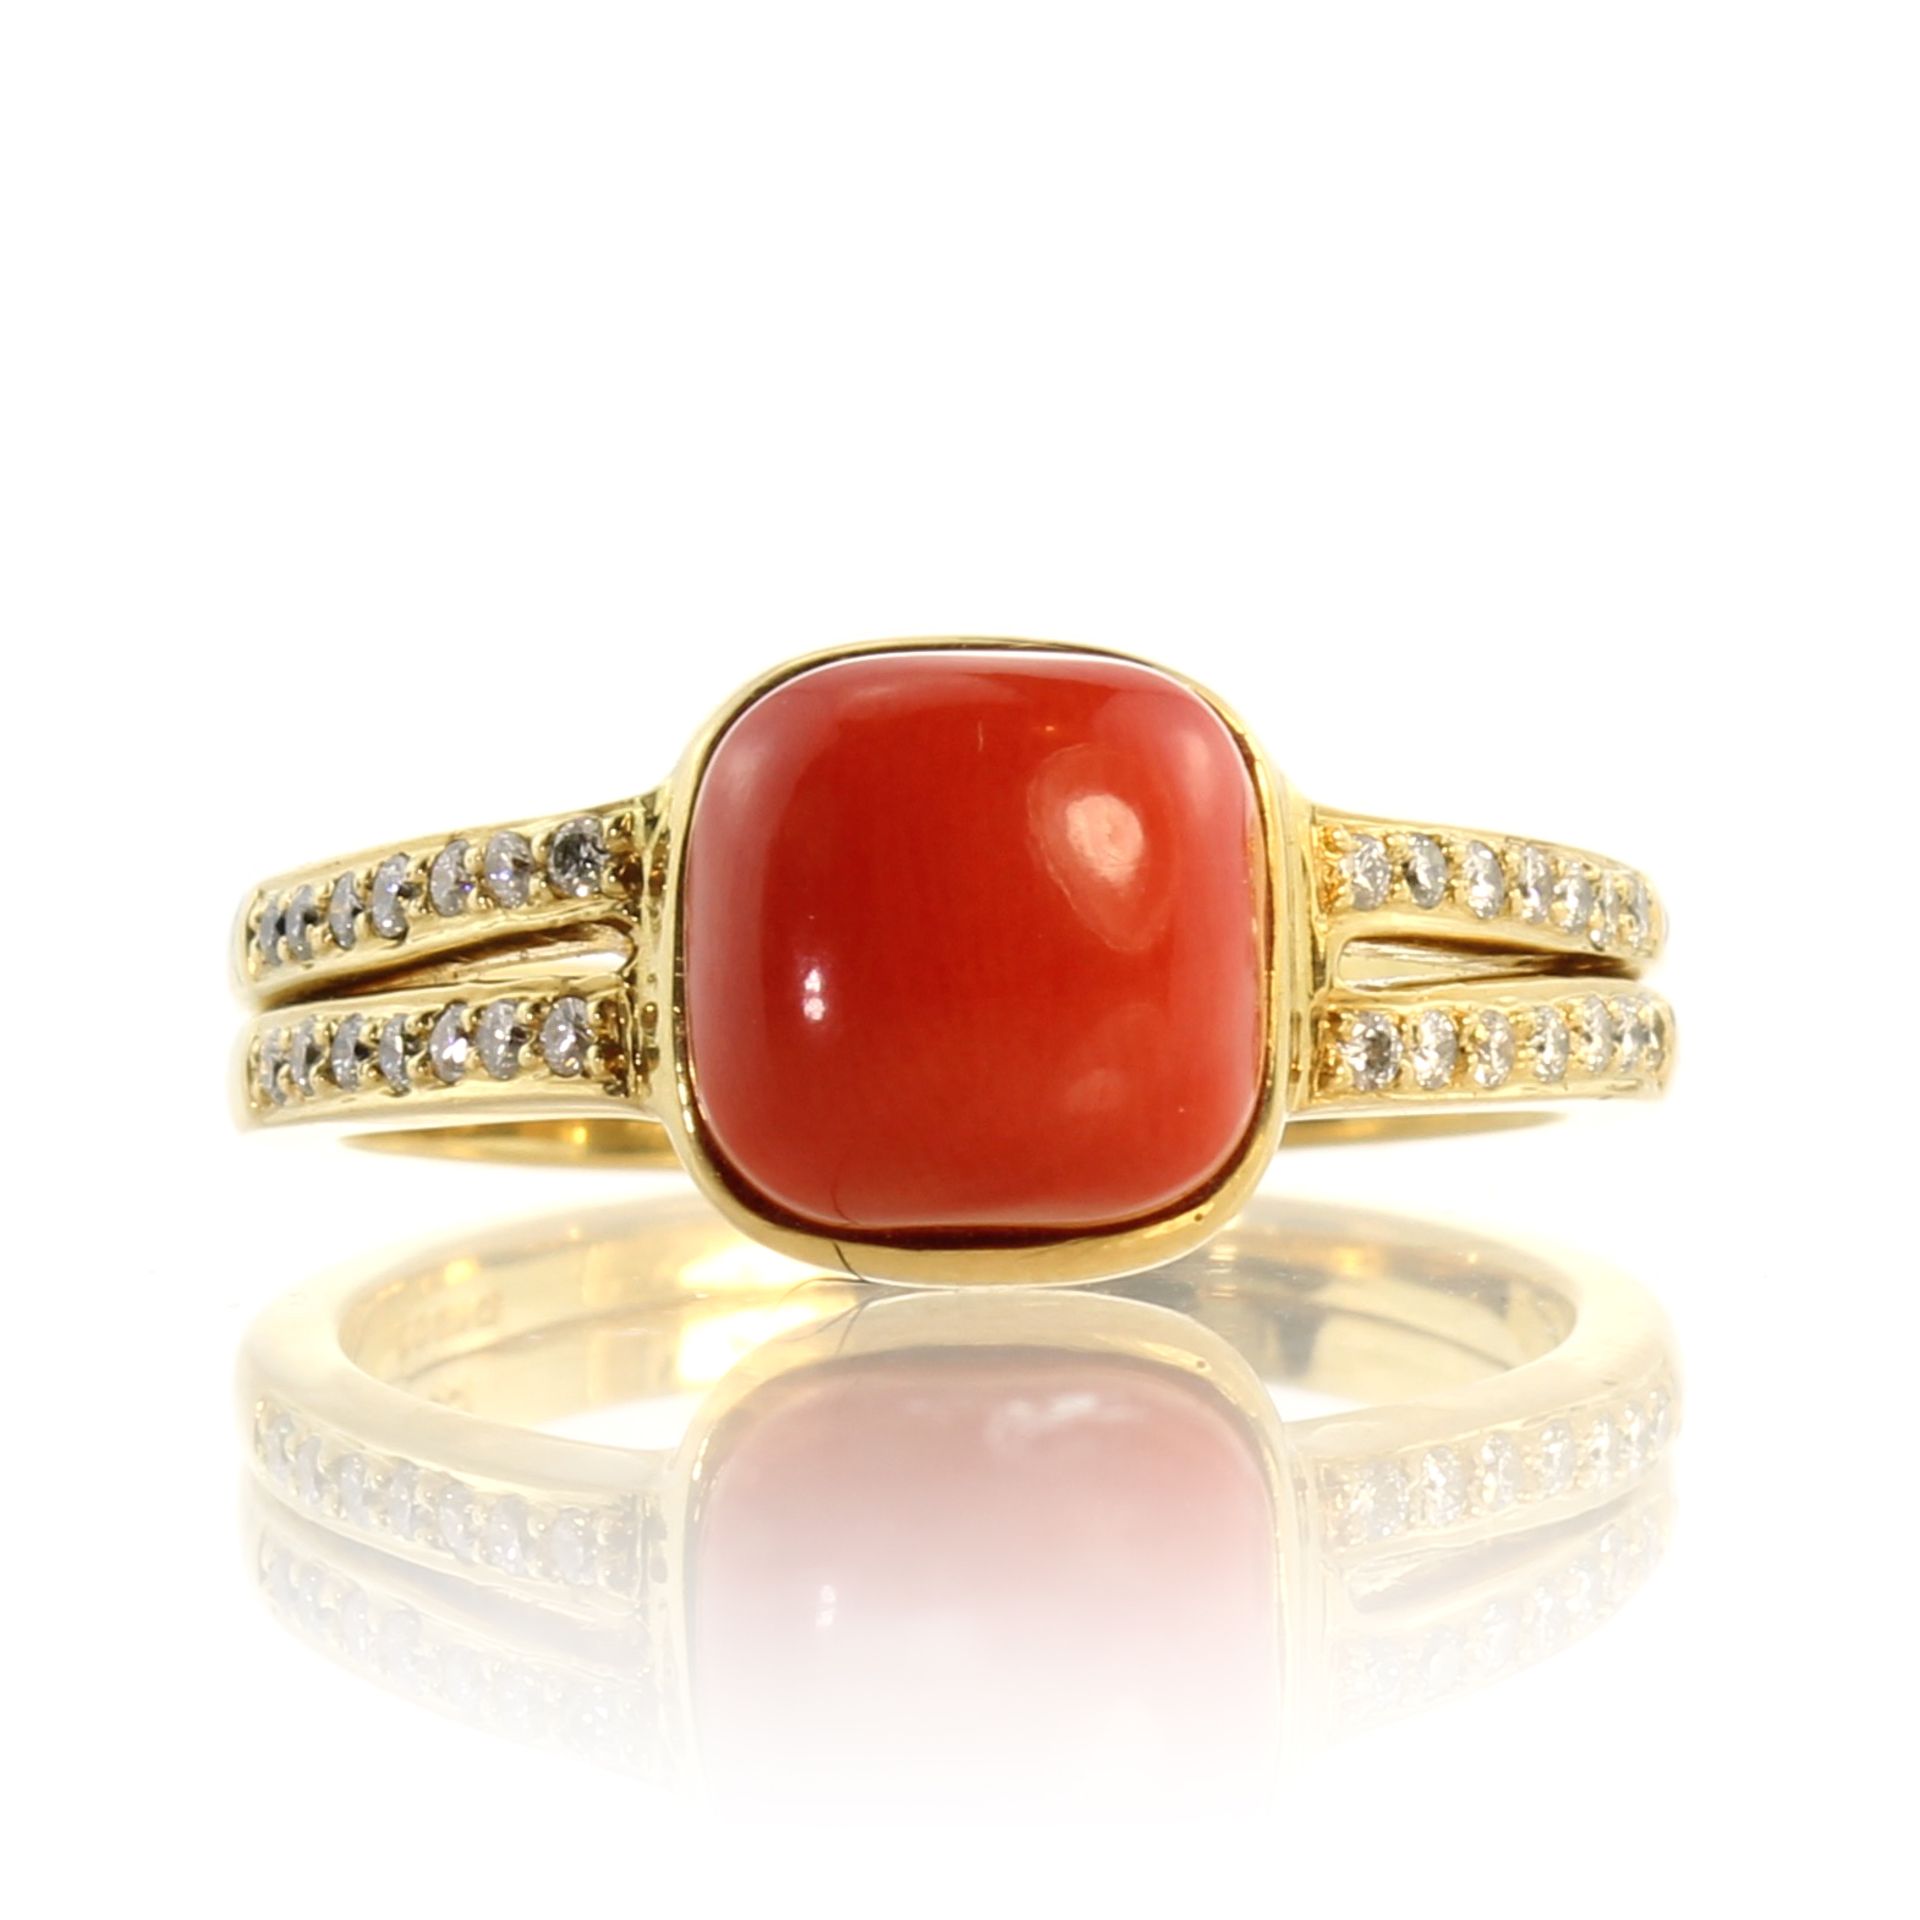 A coral and diamond dress ring in 18ct yellow gold set with a central square coral cabochon